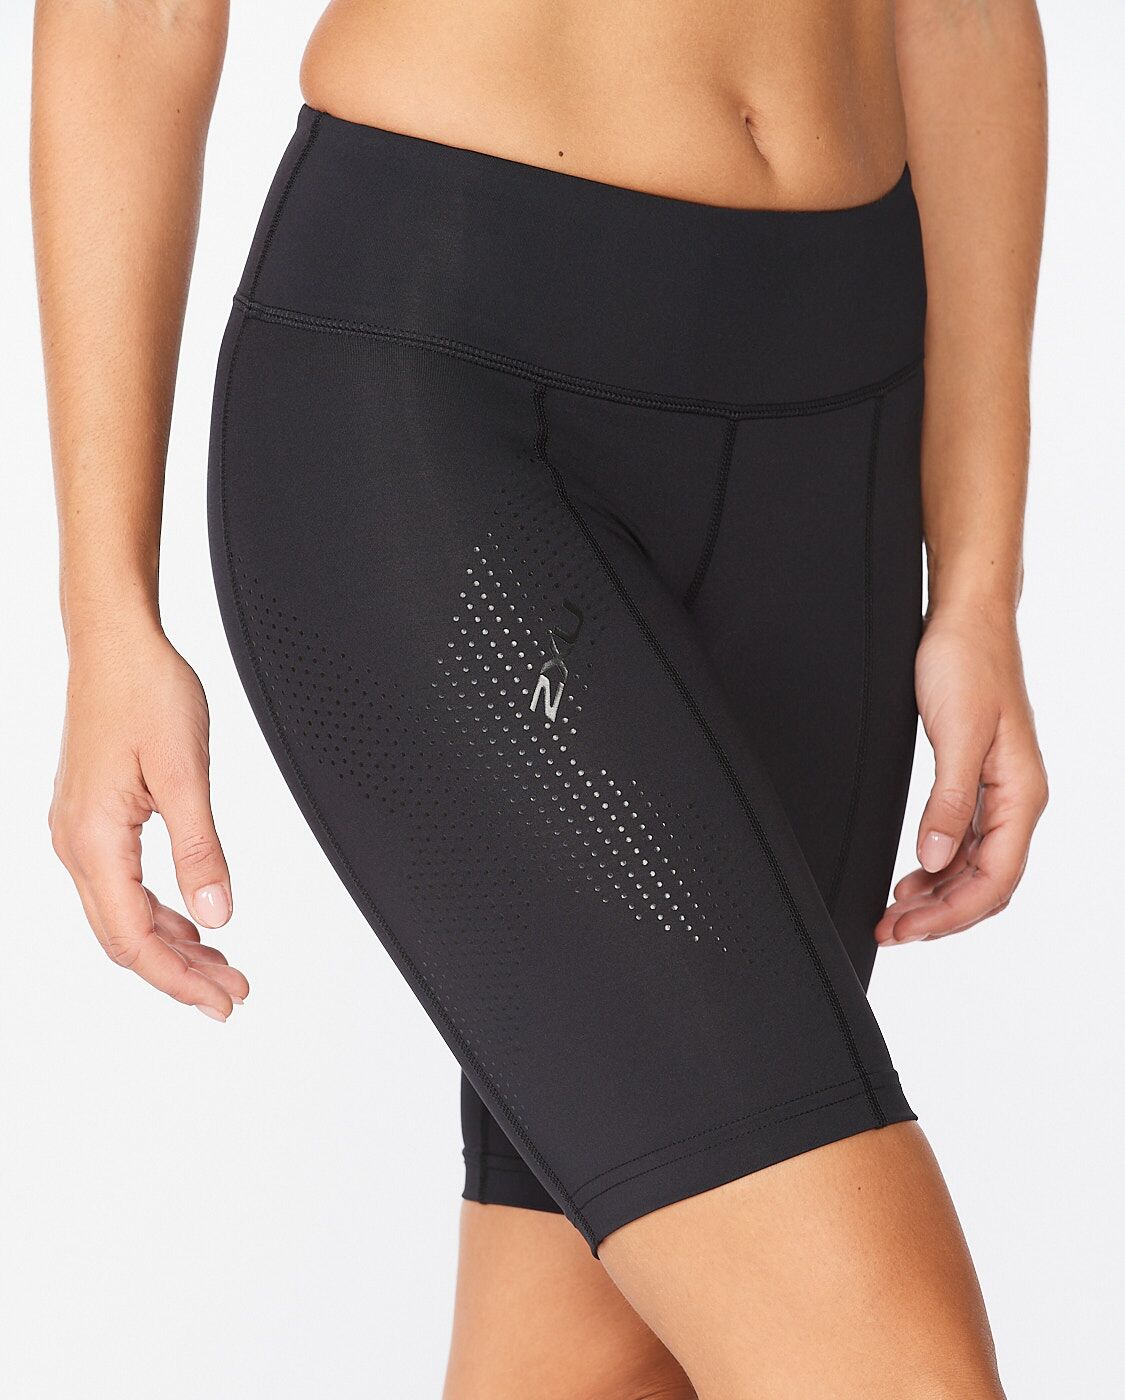 2XU South Africa - Womens Motion Mid-Rise Compression Short - Black/Dotted Black Logo